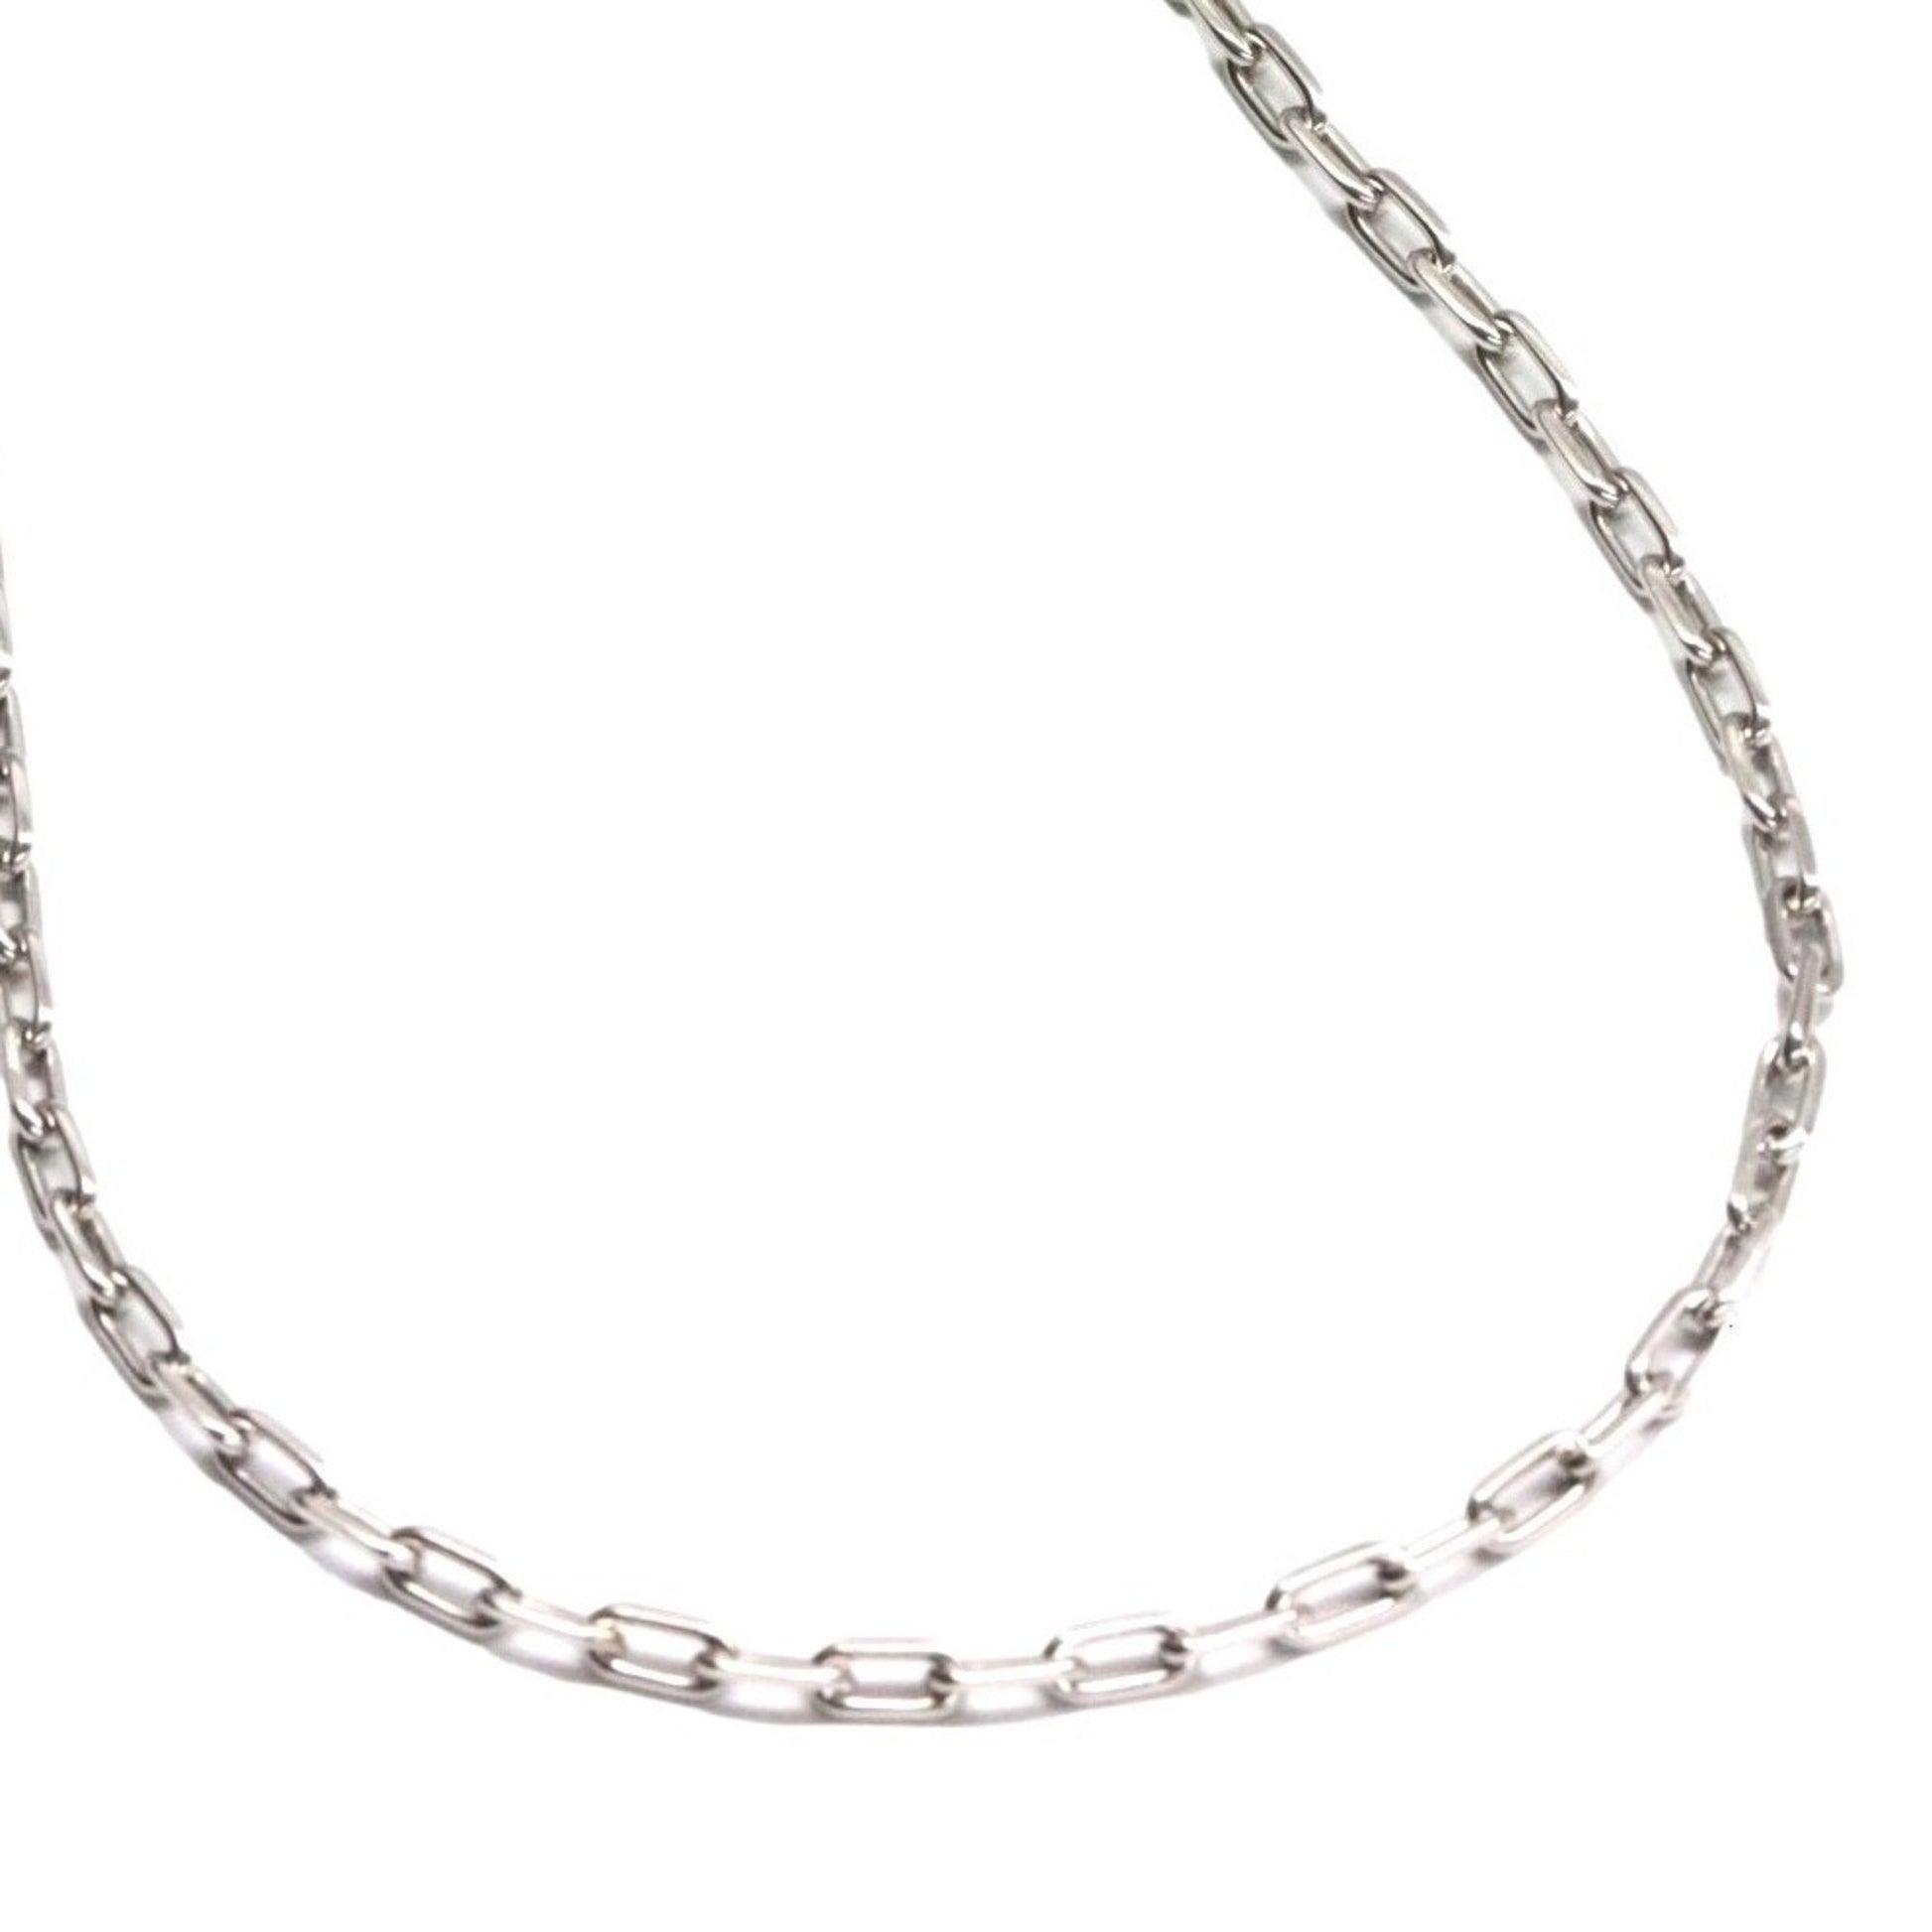 Cartier Spartacus Chain Necklace in 18K White Gold

Additional Information:
Brand: Cartier
Gender: Women
Material: White gold (18K)
Condition: Good
Condition details: The item has been used and has some minor flaws. Before purchasing, please refer